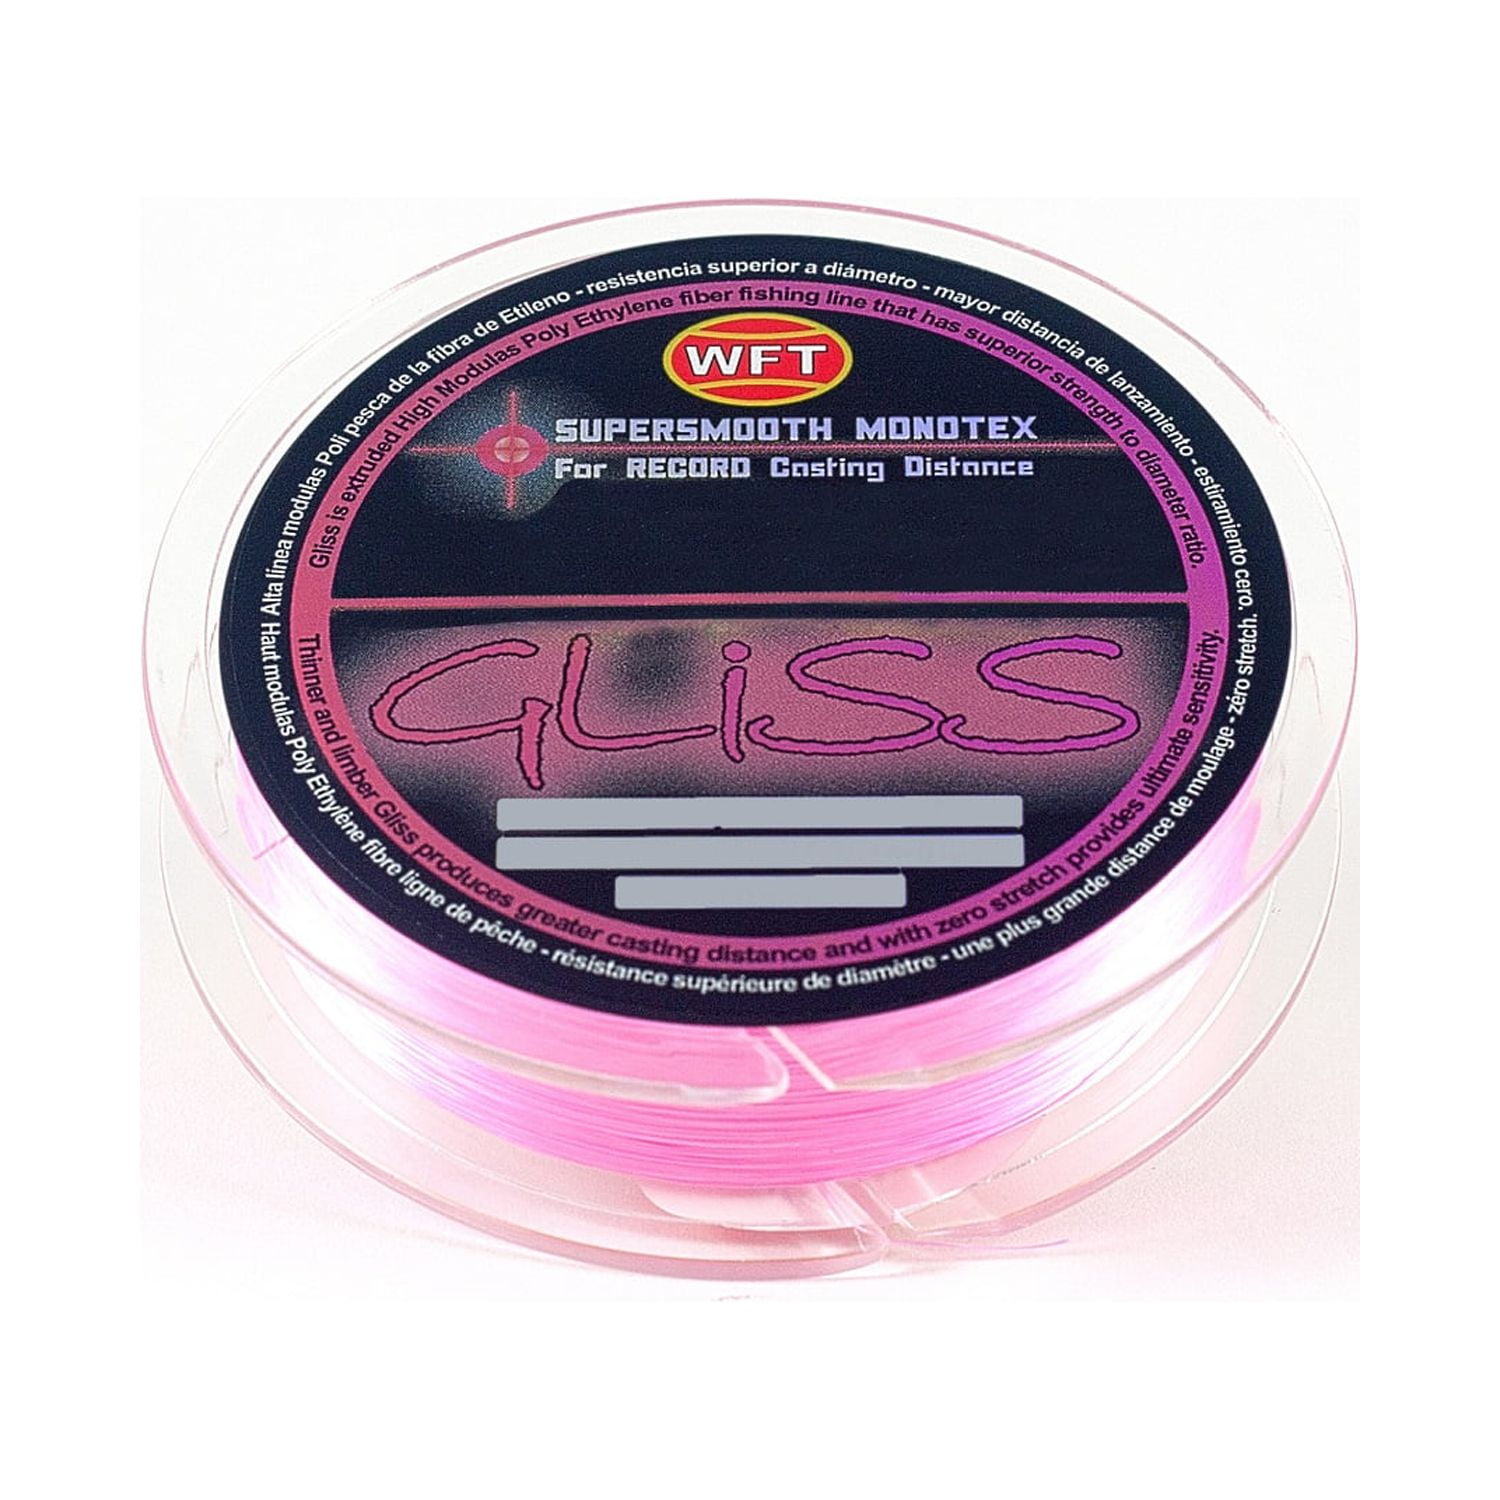 Ardent® Gliss Fishing Line